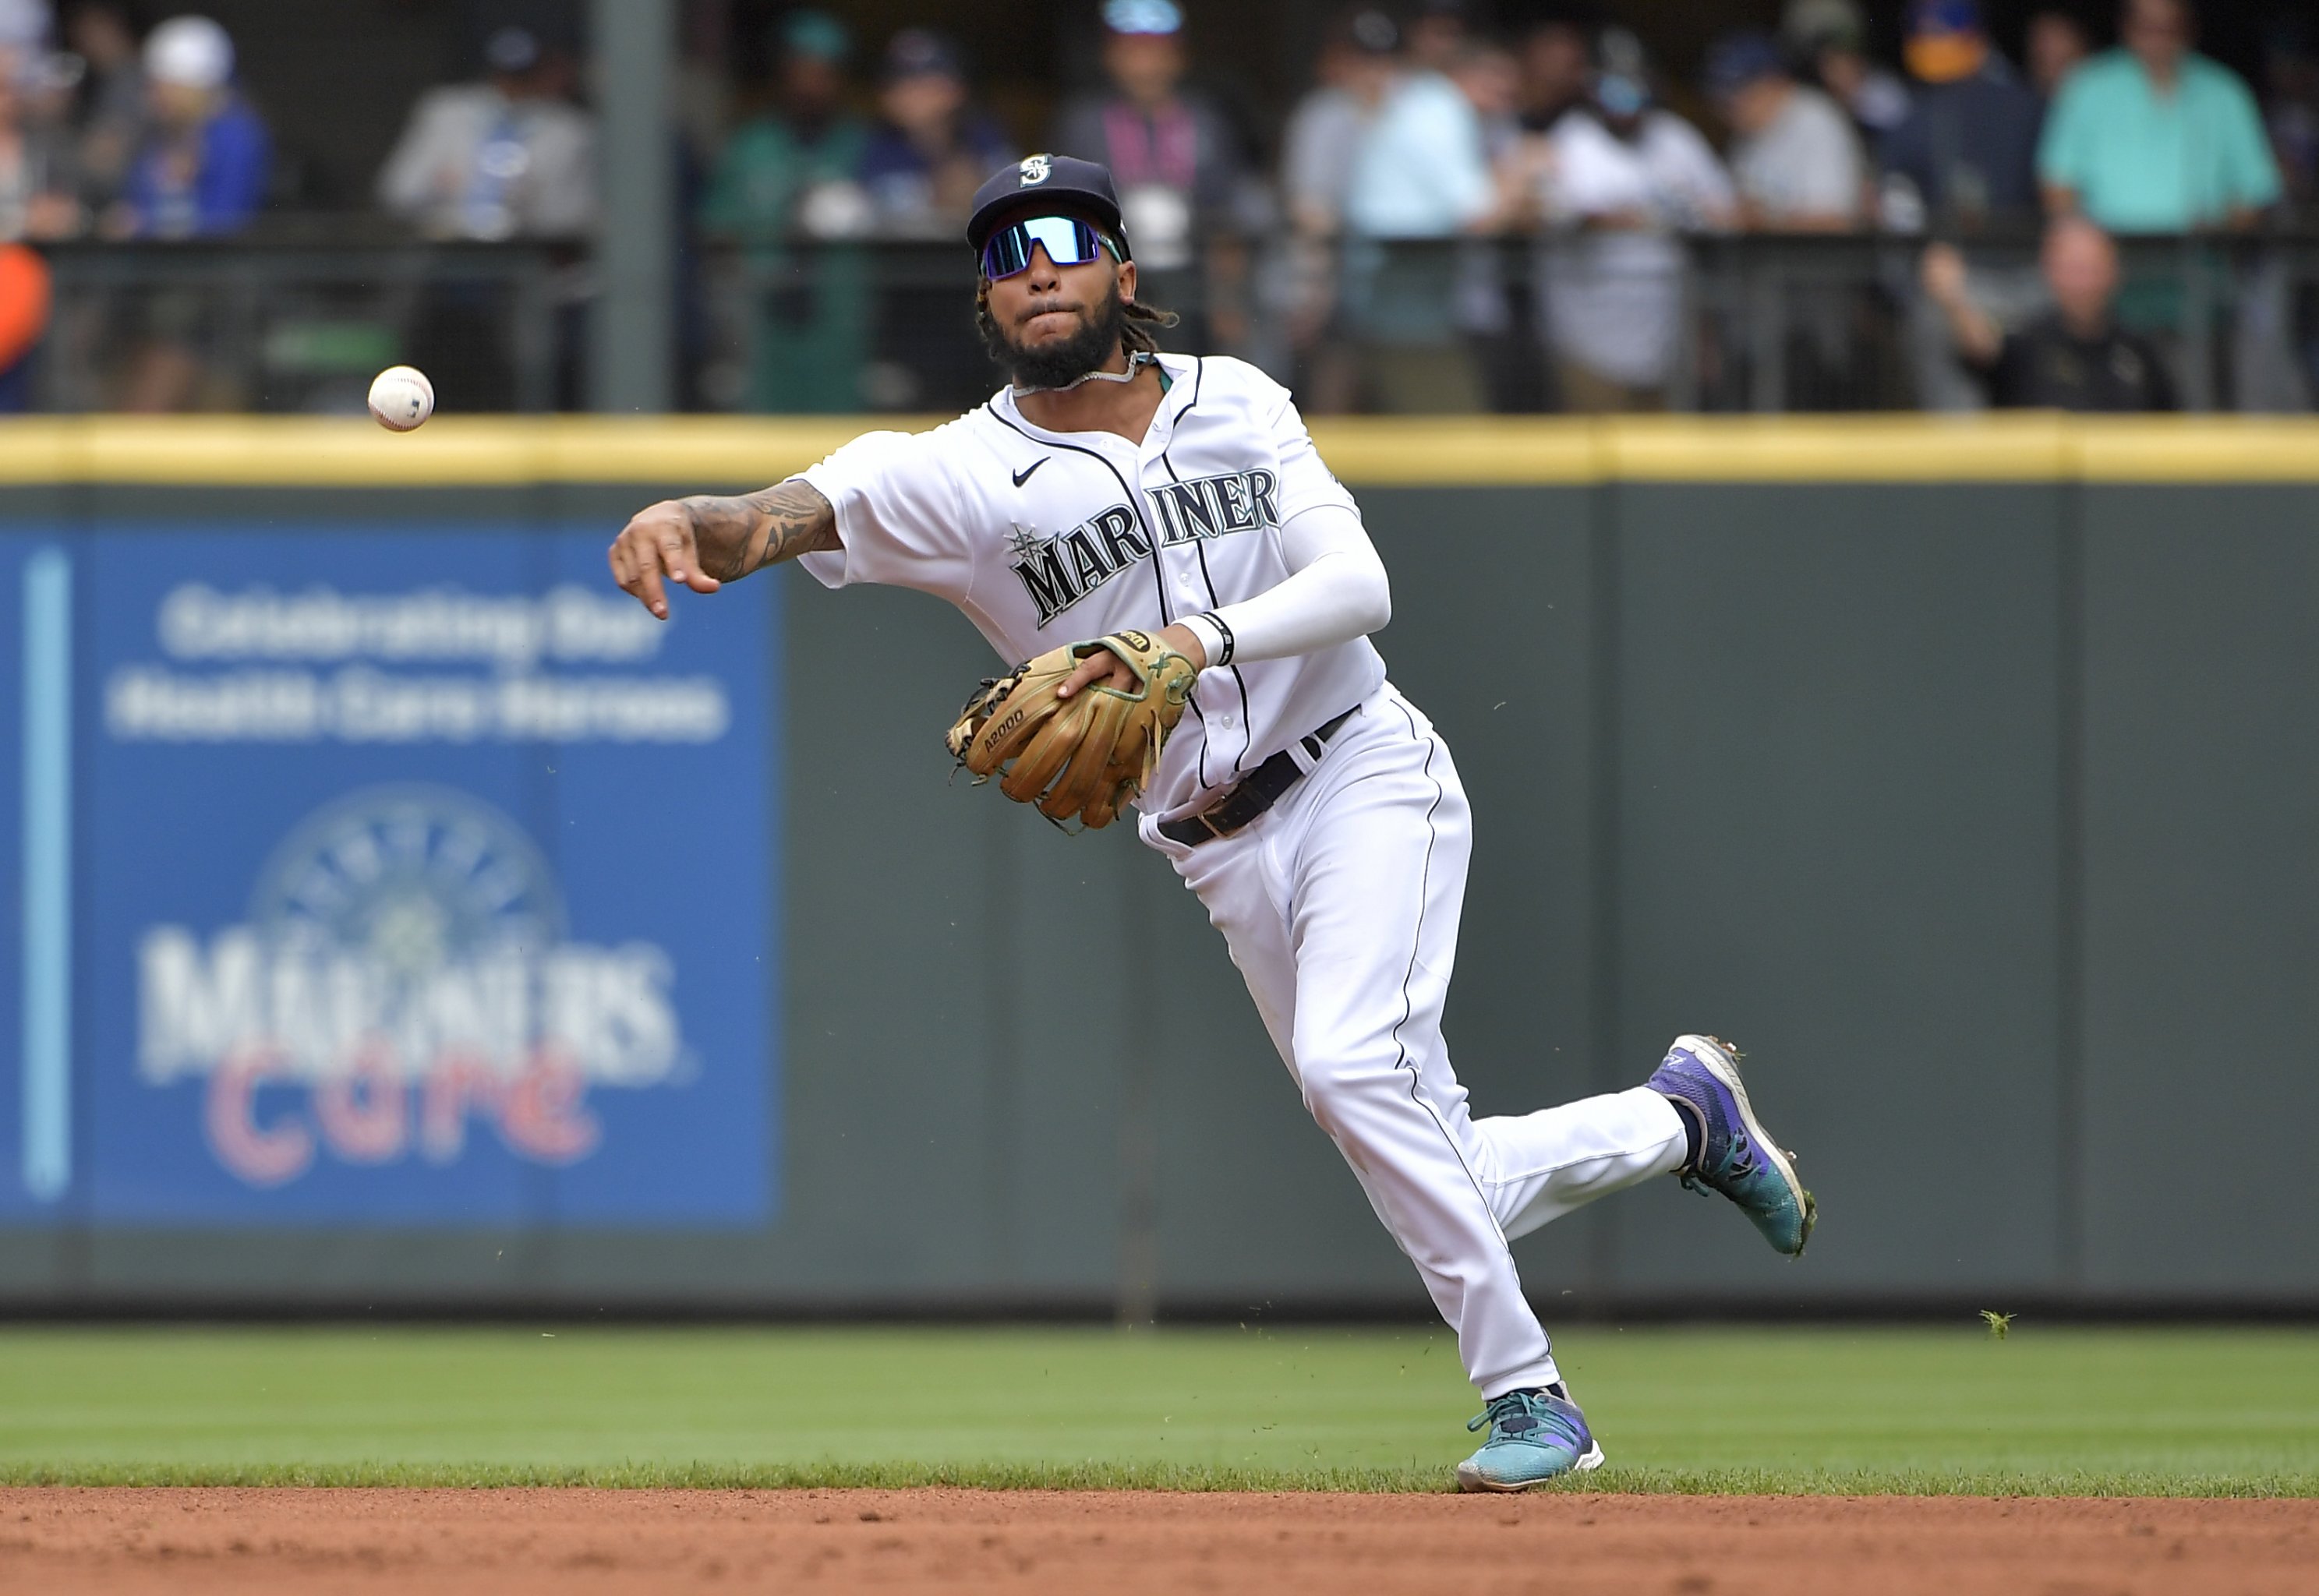 Cano would be anchor for Mariners' lineup